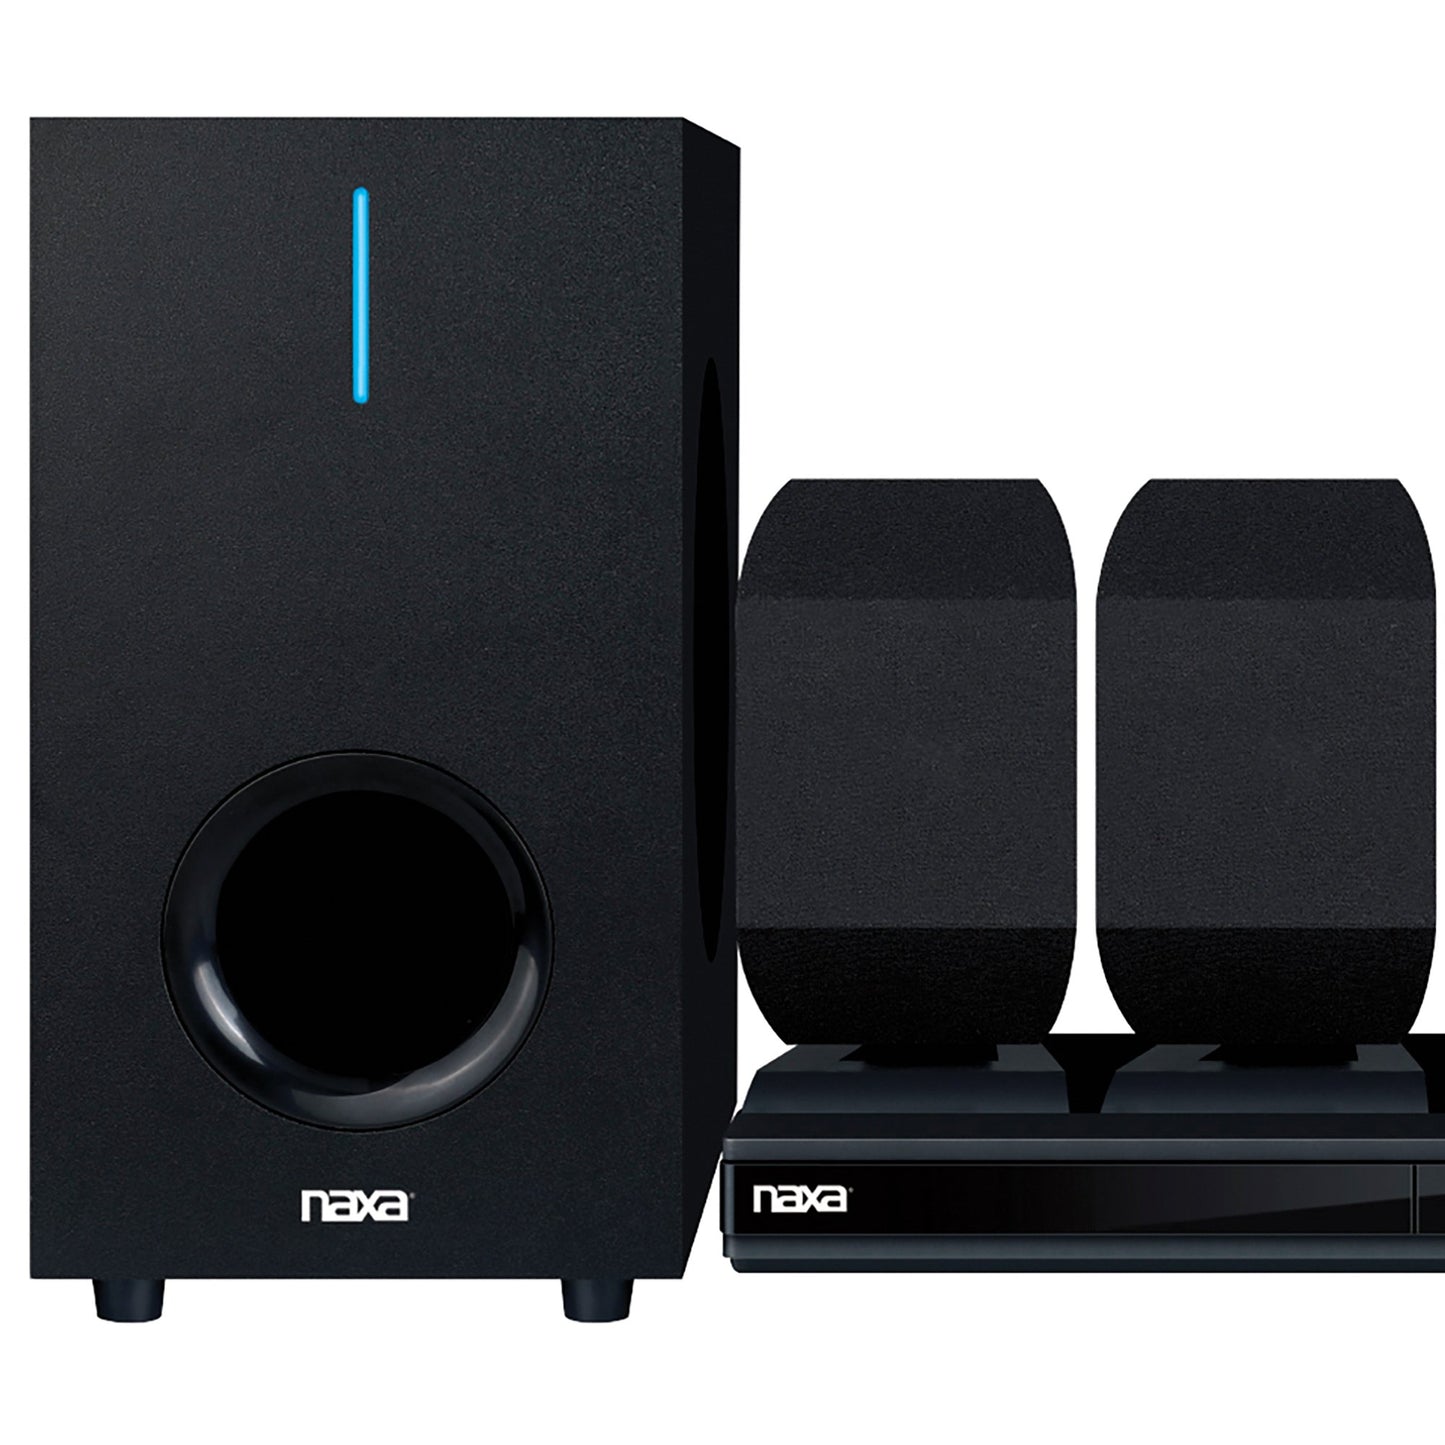 Naxa ND-864 5.1-Channel High-Powered Home Theater DVD and Karaoke Speaker System